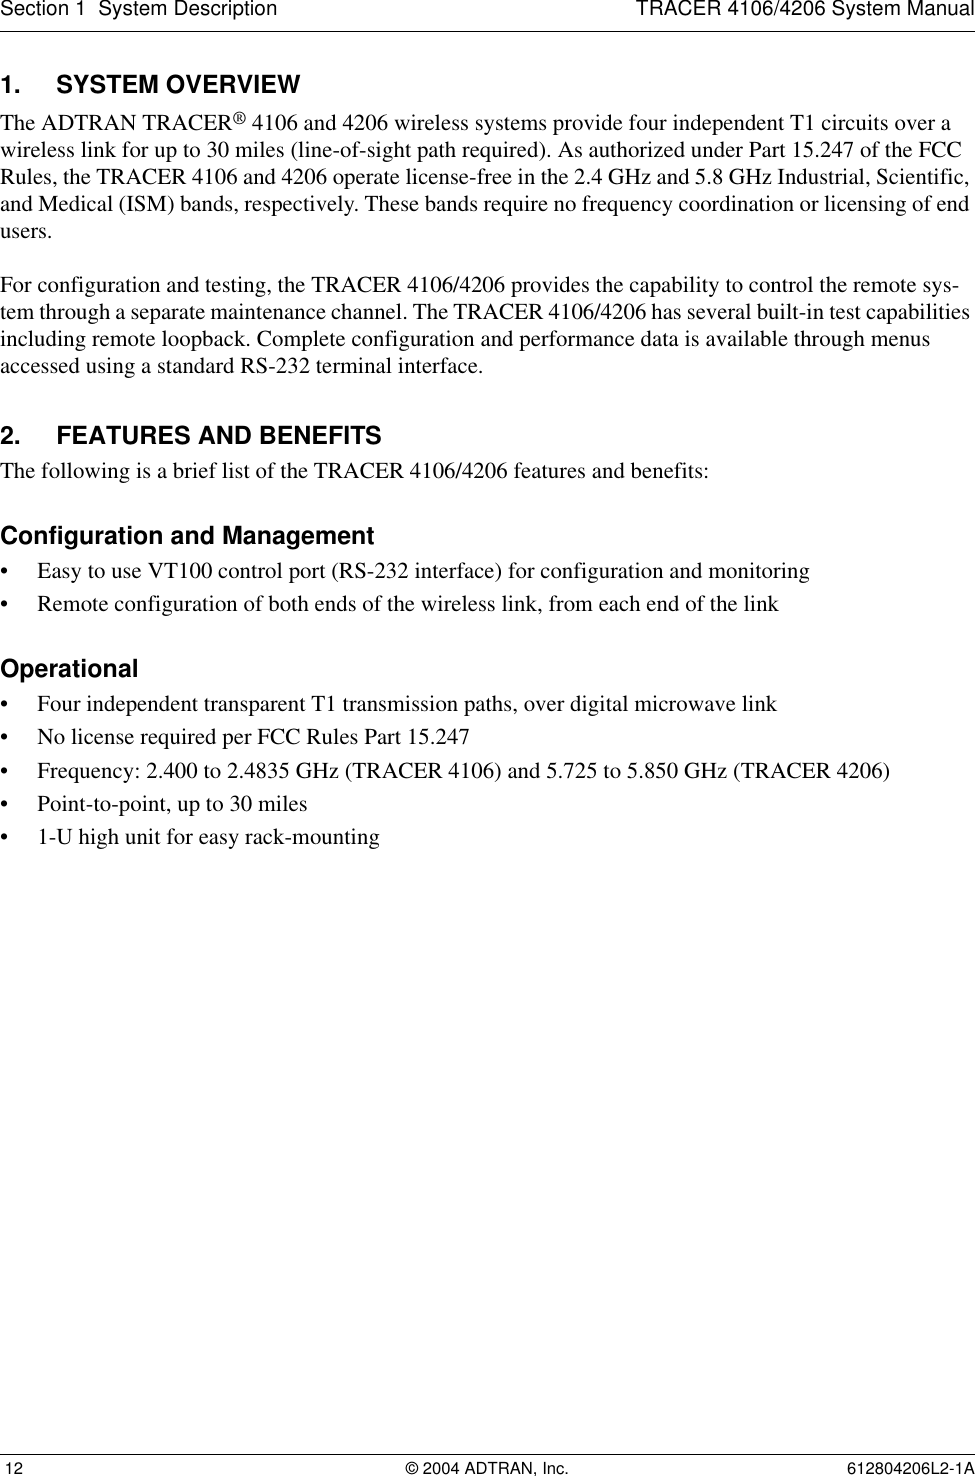 Section 1  System Description TRACER 4106/4206 System Manual 12 © 2004 ADTRAN, Inc. 612804206L2-1A1. SYSTEM OVERVIEWThe ADTRAN TRACER® 4106 and 4206 wireless systems provide four independent T1 circuits over a wireless link for up to 30 miles (line-of-sight path required). As authorized under Part 15.247 of the FCC Rules, the TRACER 4106 and 4206 operate license-free in the 2.4 GHz and 5.8 GHz Industrial, Scientific, and Medical (ISM) bands, respectively. These bands require no frequency coordination or licensing of end users.For configuration and testing, the TRACER 4106/4206 provides the capability to control the remote sys-tem through a separate maintenance channel. The TRACER 4106/4206 has several built-in test capabilities including remote loopback. Complete configuration and performance data is available through menus accessed using a standard RS-232 terminal interface.2. FEATURES AND BENEFITSThe following is a brief list of the TRACER 4106/4206 features and benefits:Configuration and Management• Easy to use VT100 control port (RS-232 interface) for configuration and monitoring• Remote configuration of both ends of the wireless link, from each end of the linkOperational• Four independent transparent T1 transmission paths, over digital microwave link• No license required per FCC Rules Part 15.247• Frequency: 2.400 to 2.4835 GHz (TRACER 4106) and 5.725 to 5.850 GHz (TRACER 4206)• Point-to-point, up to 30 miles• 1-U high unit for easy rack-mounting